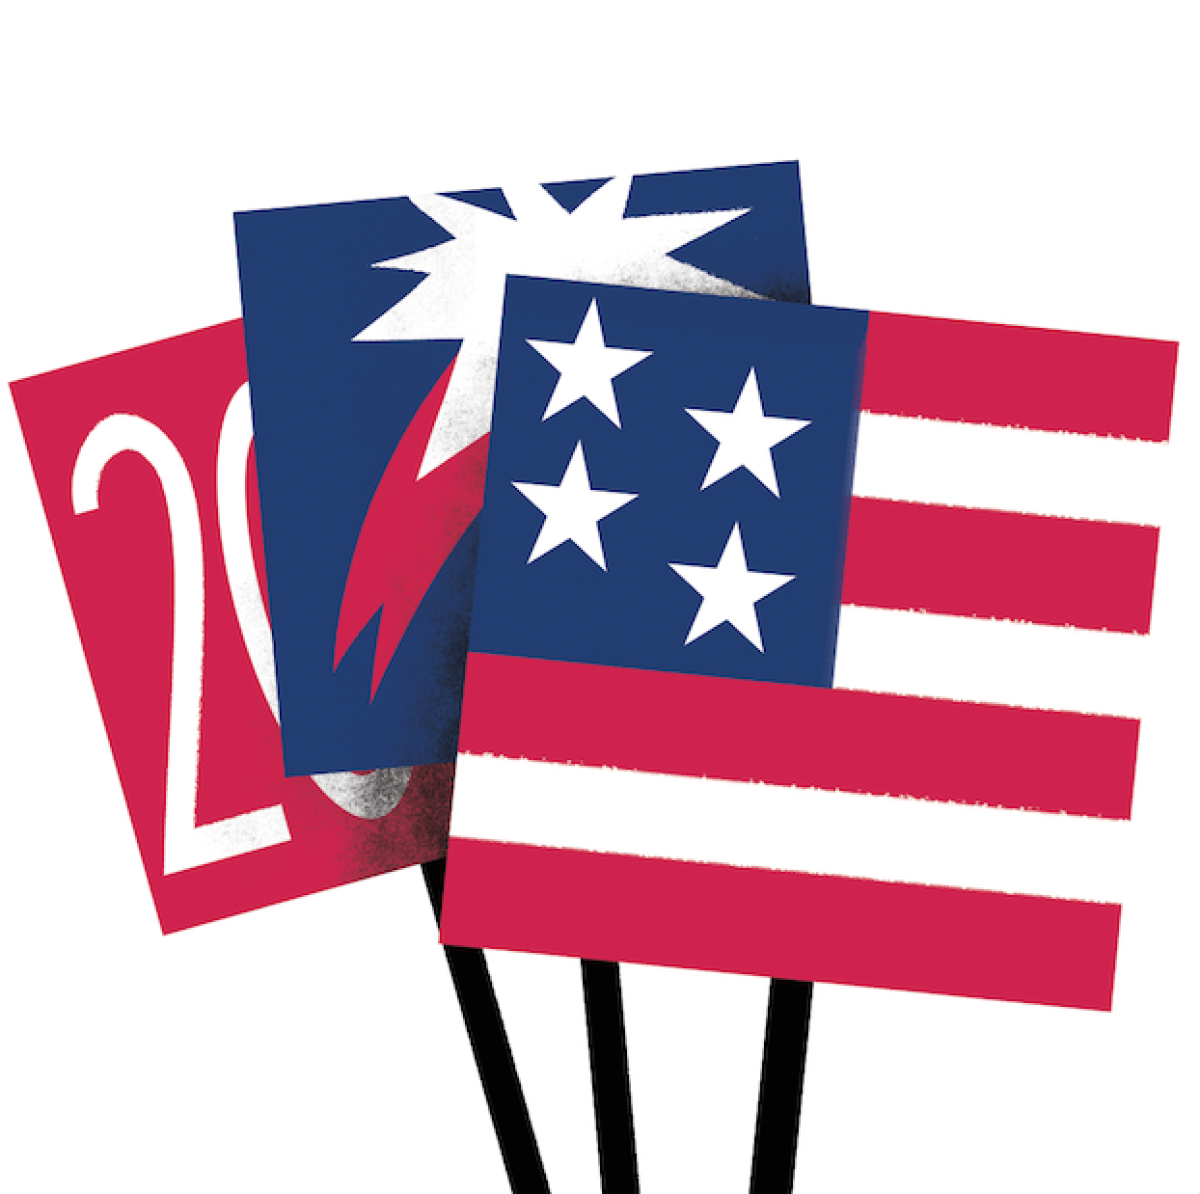 Illustration of stylized, election-related U.S. flags